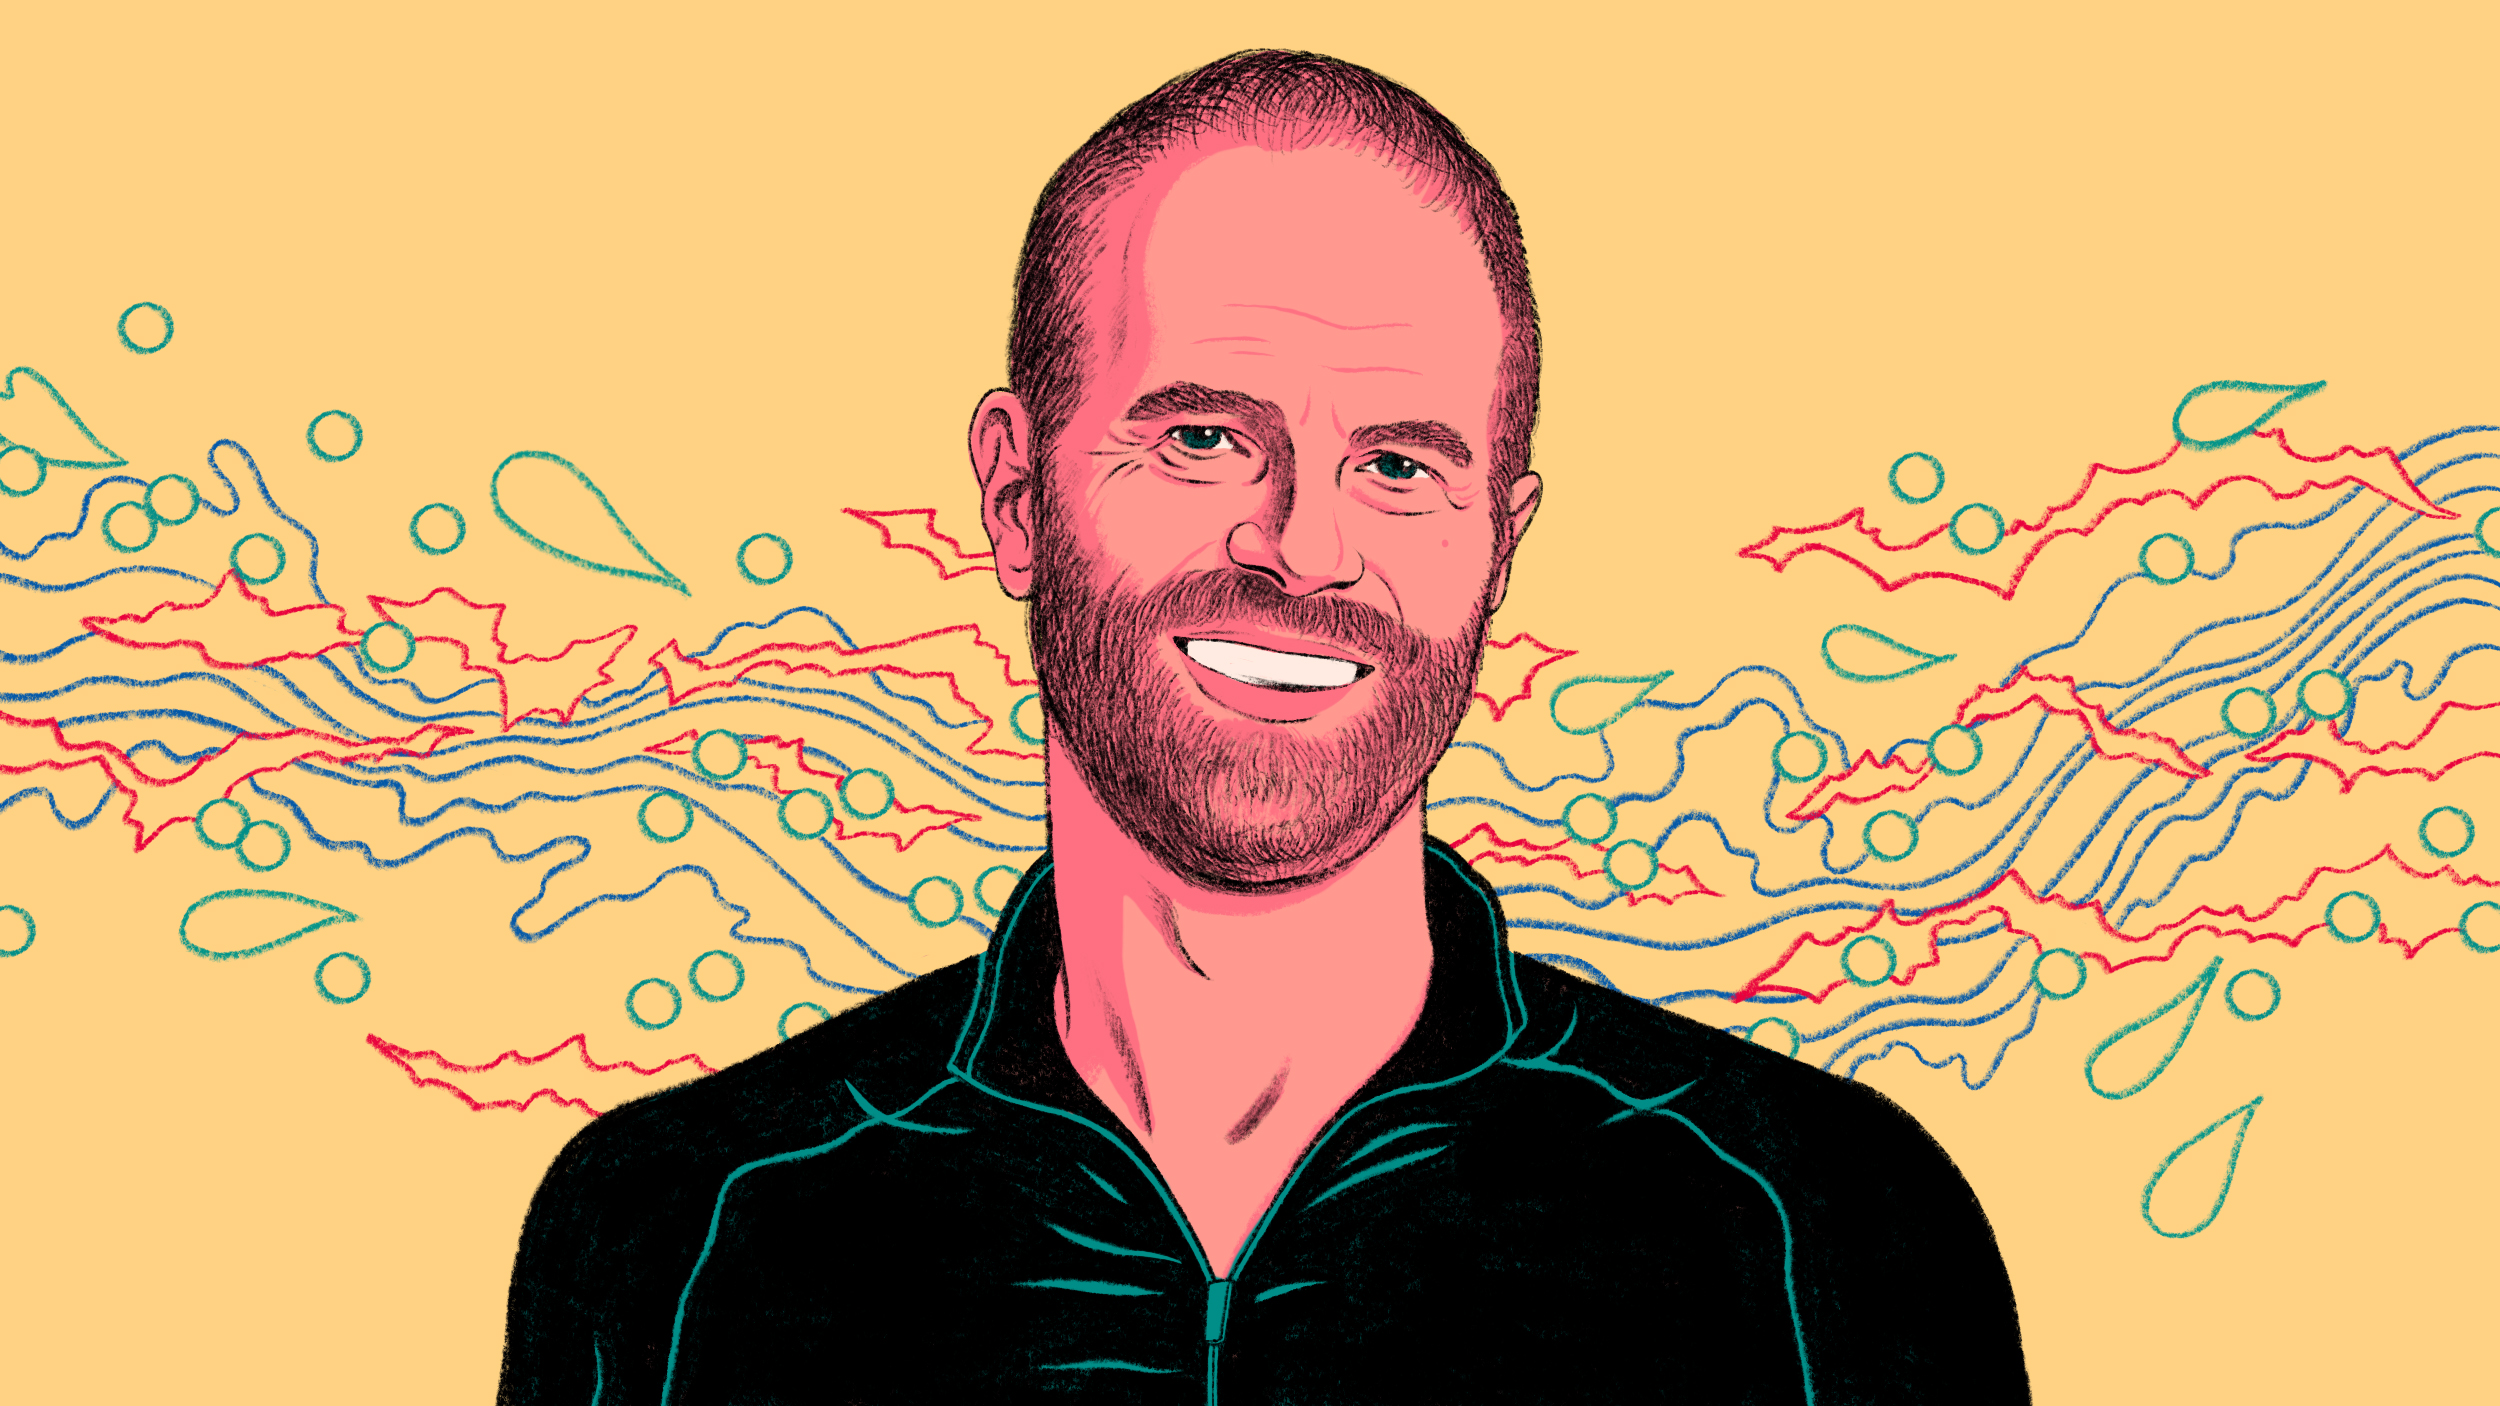 Illustration of a smiling bald man with a leadership hack, wearing a dark zip-up jacket against a yellow background with abstract green and blue waves.